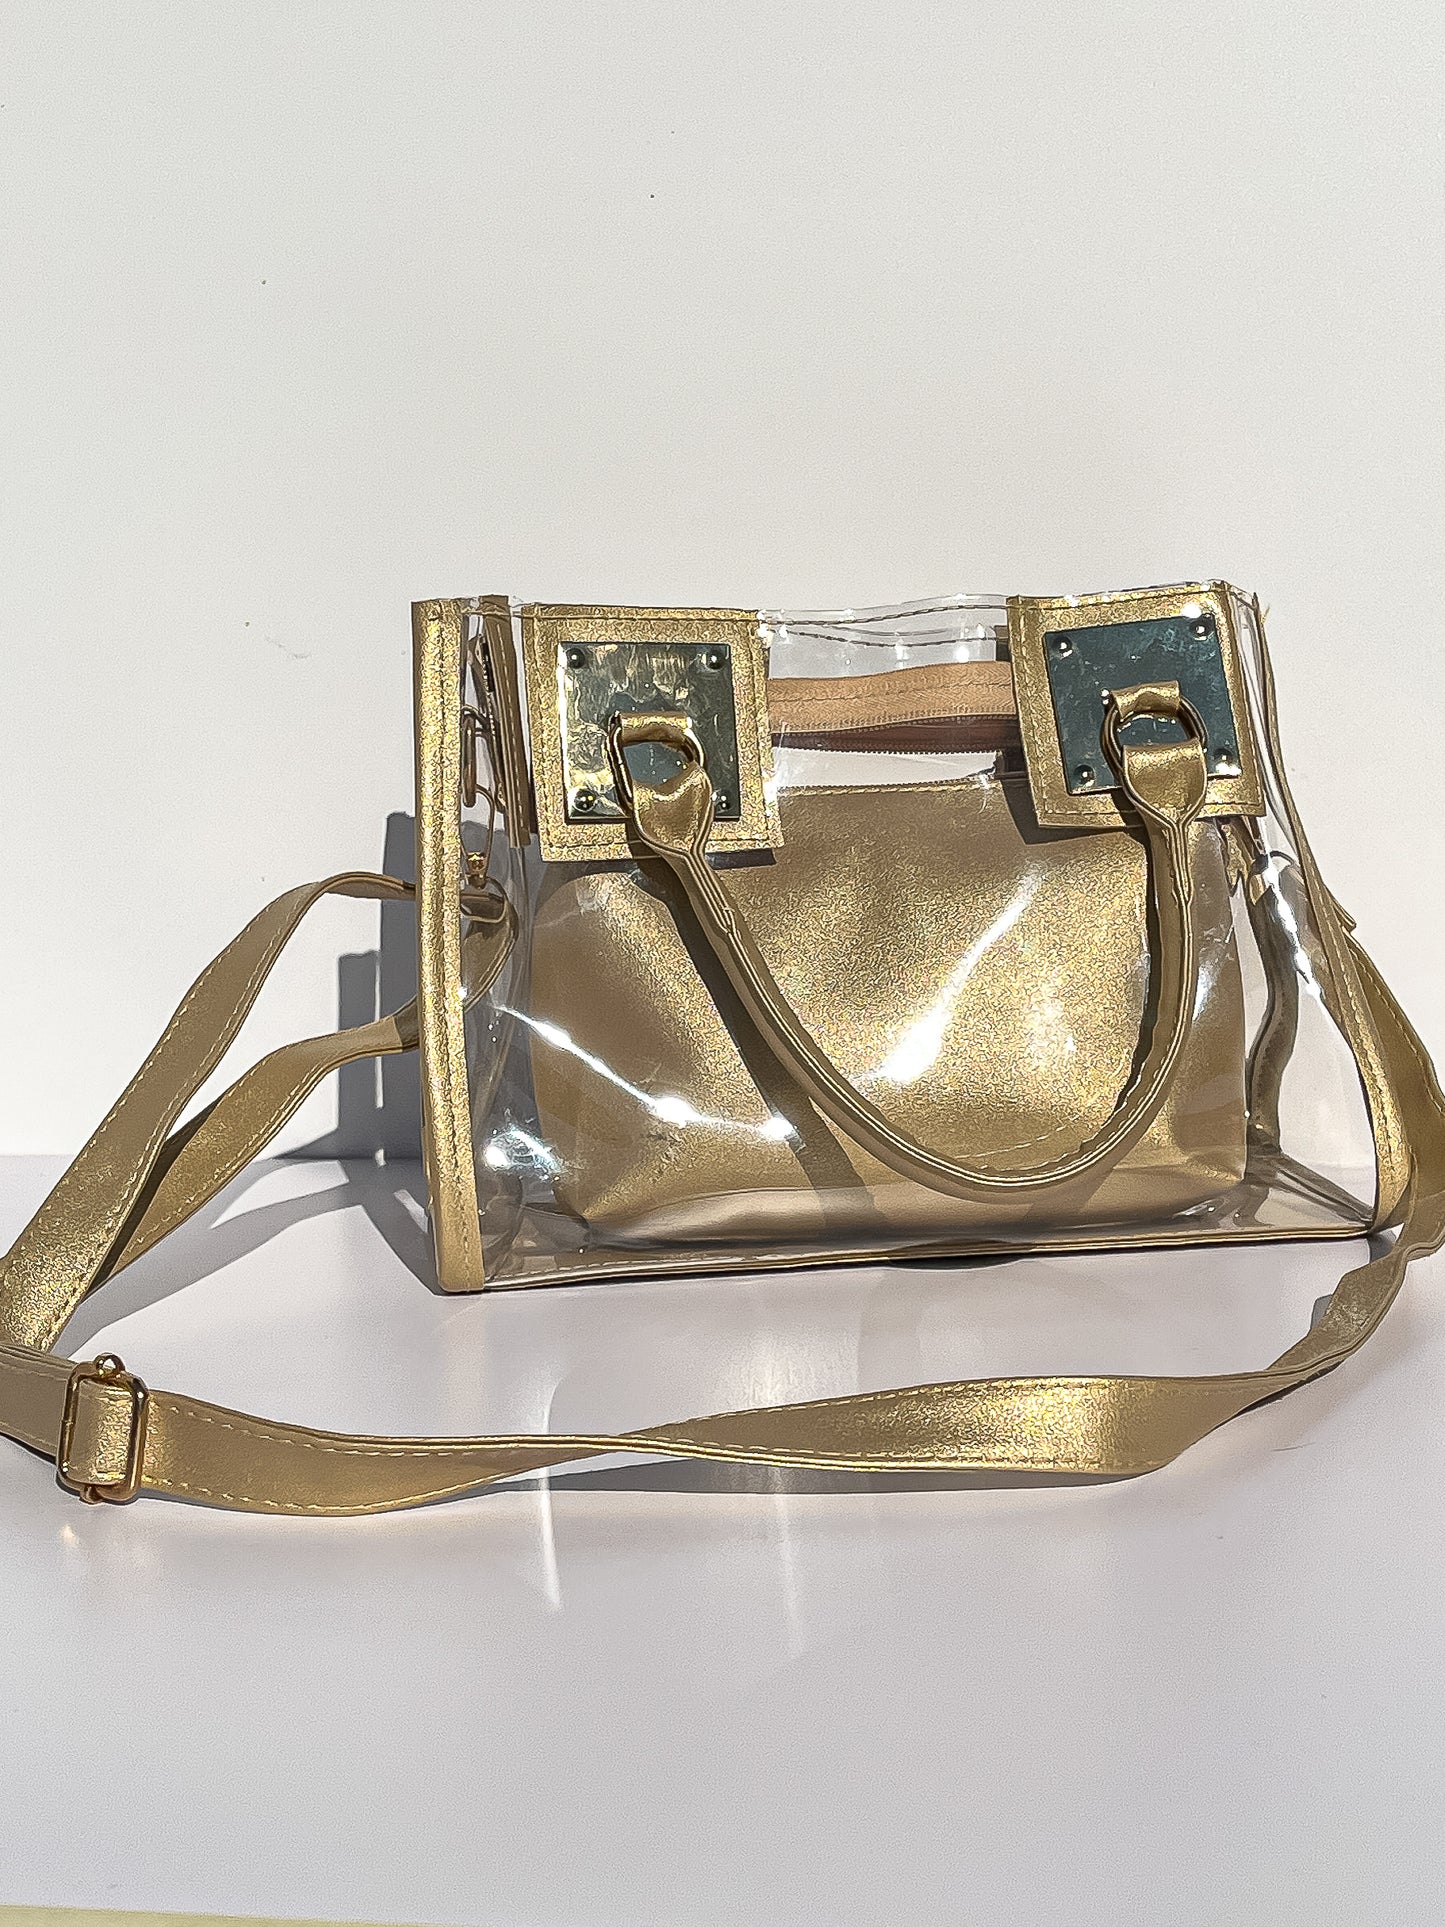 Clear Crossbody purse with gold accents and straps